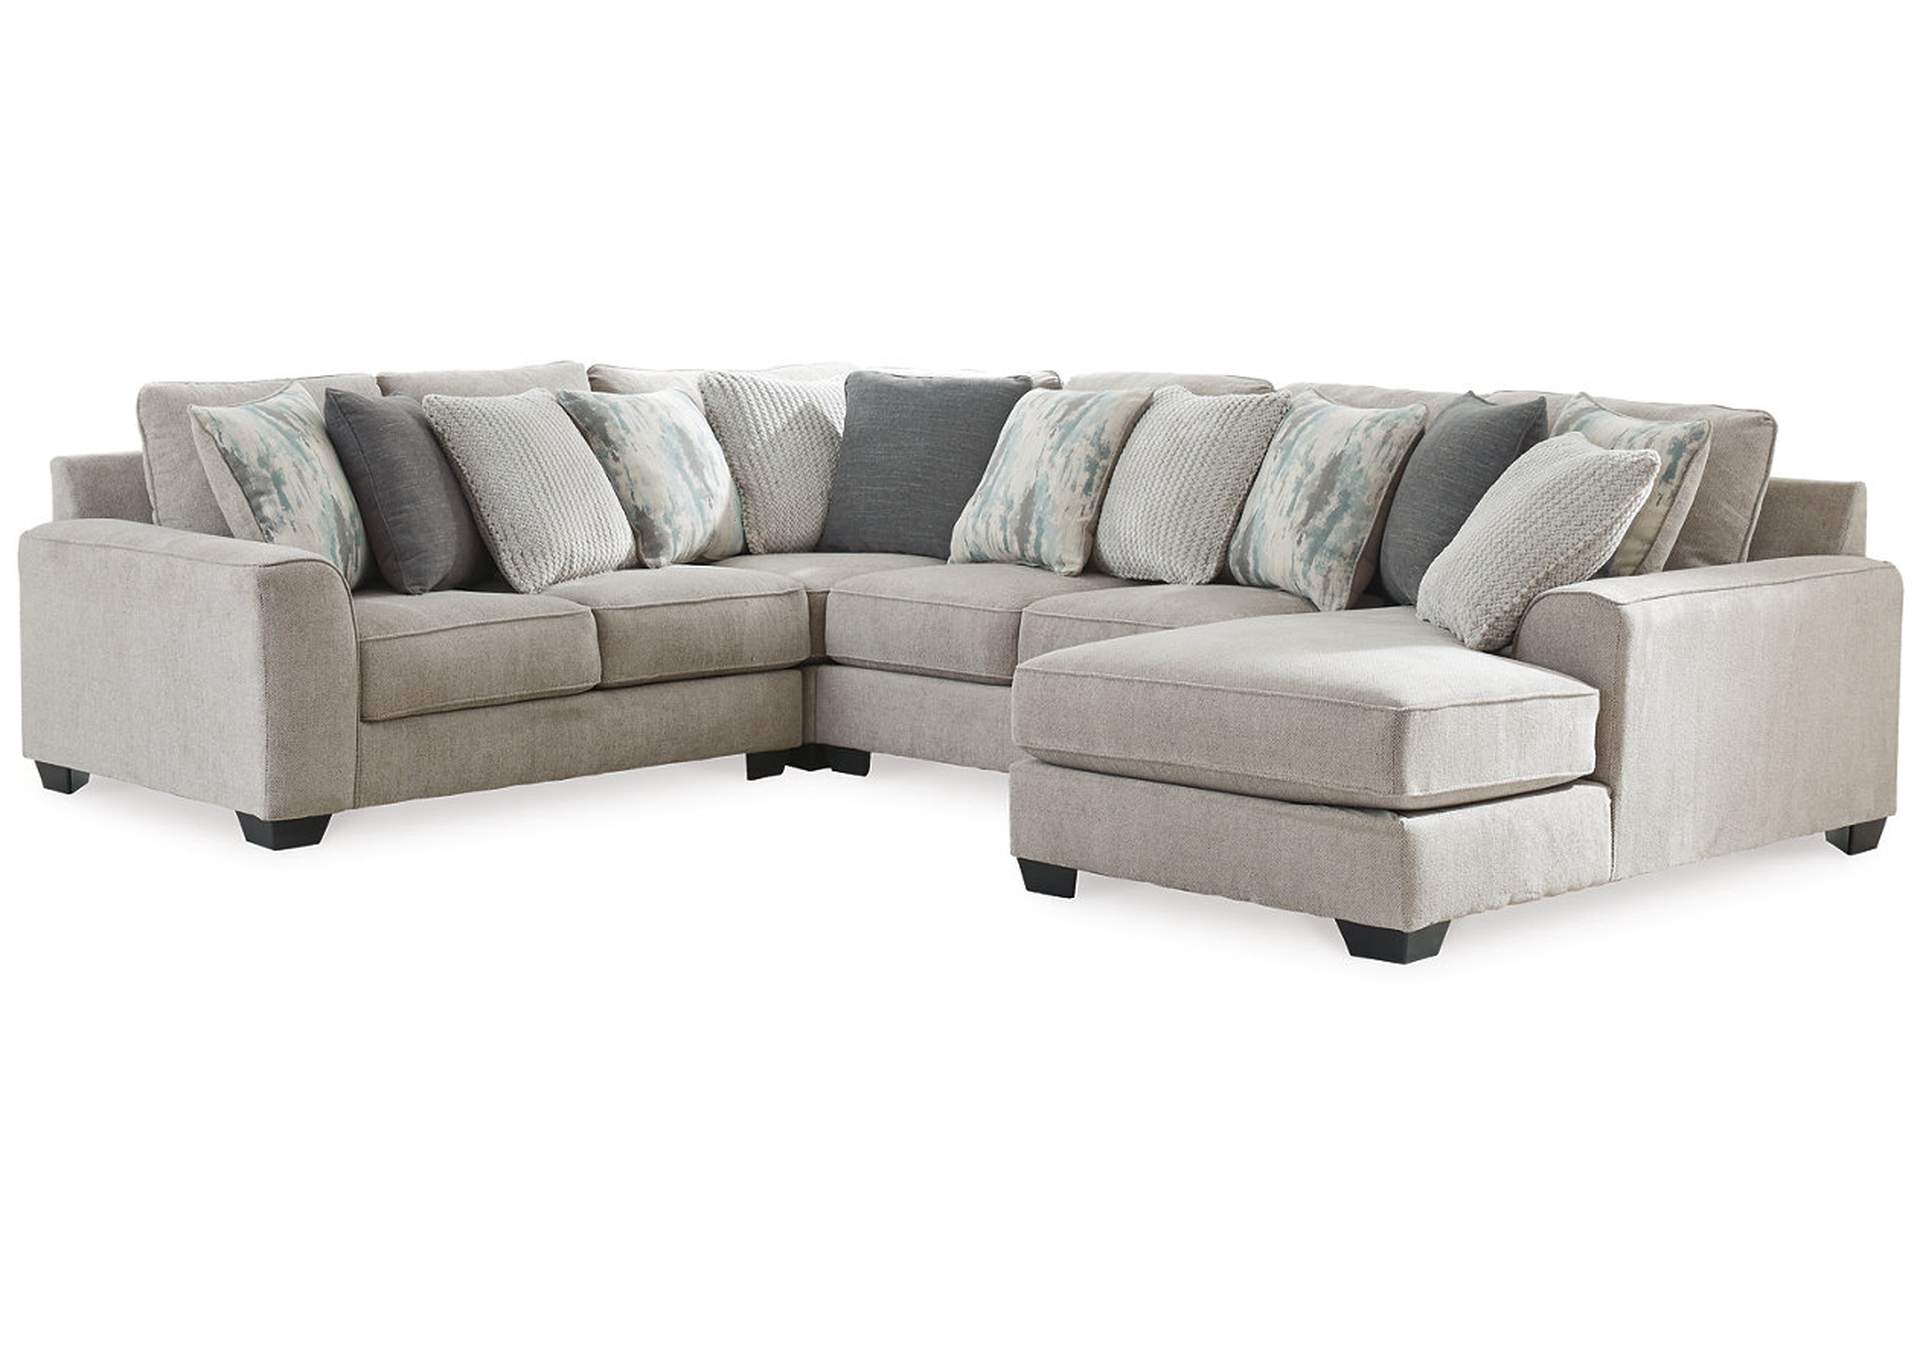 Ardsley 4-Piece Sectional with Ottoman,Benchcraft